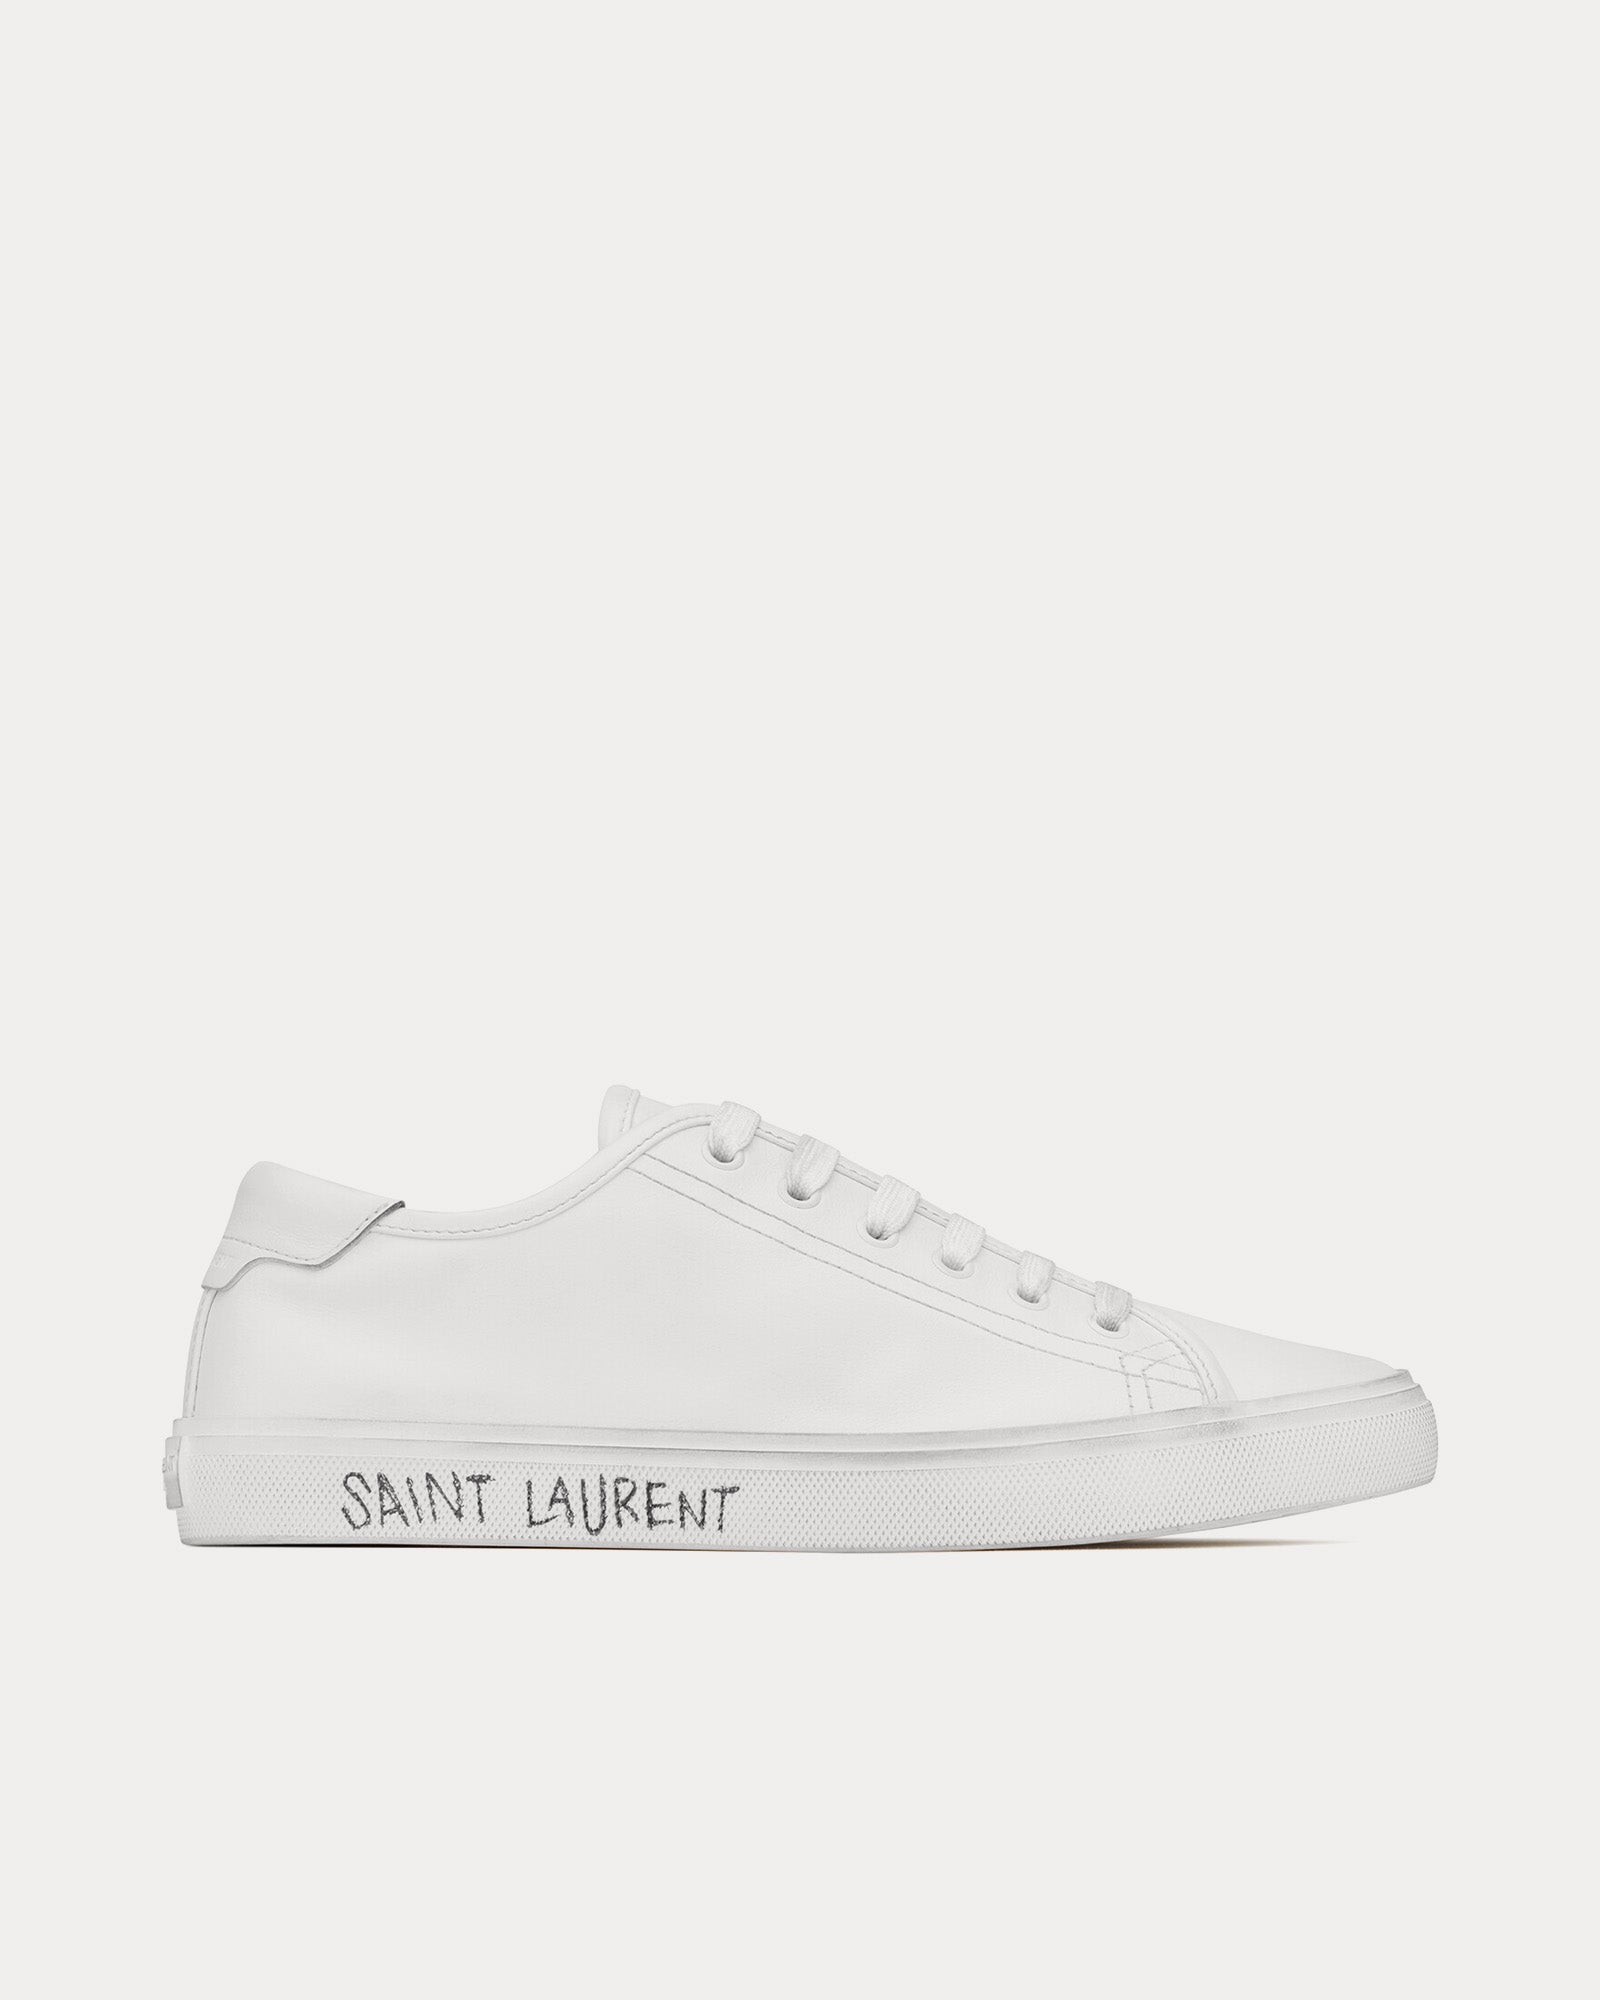 Saint Laurent - Malibu Smooth Leather Optic White Low Top Sneakers